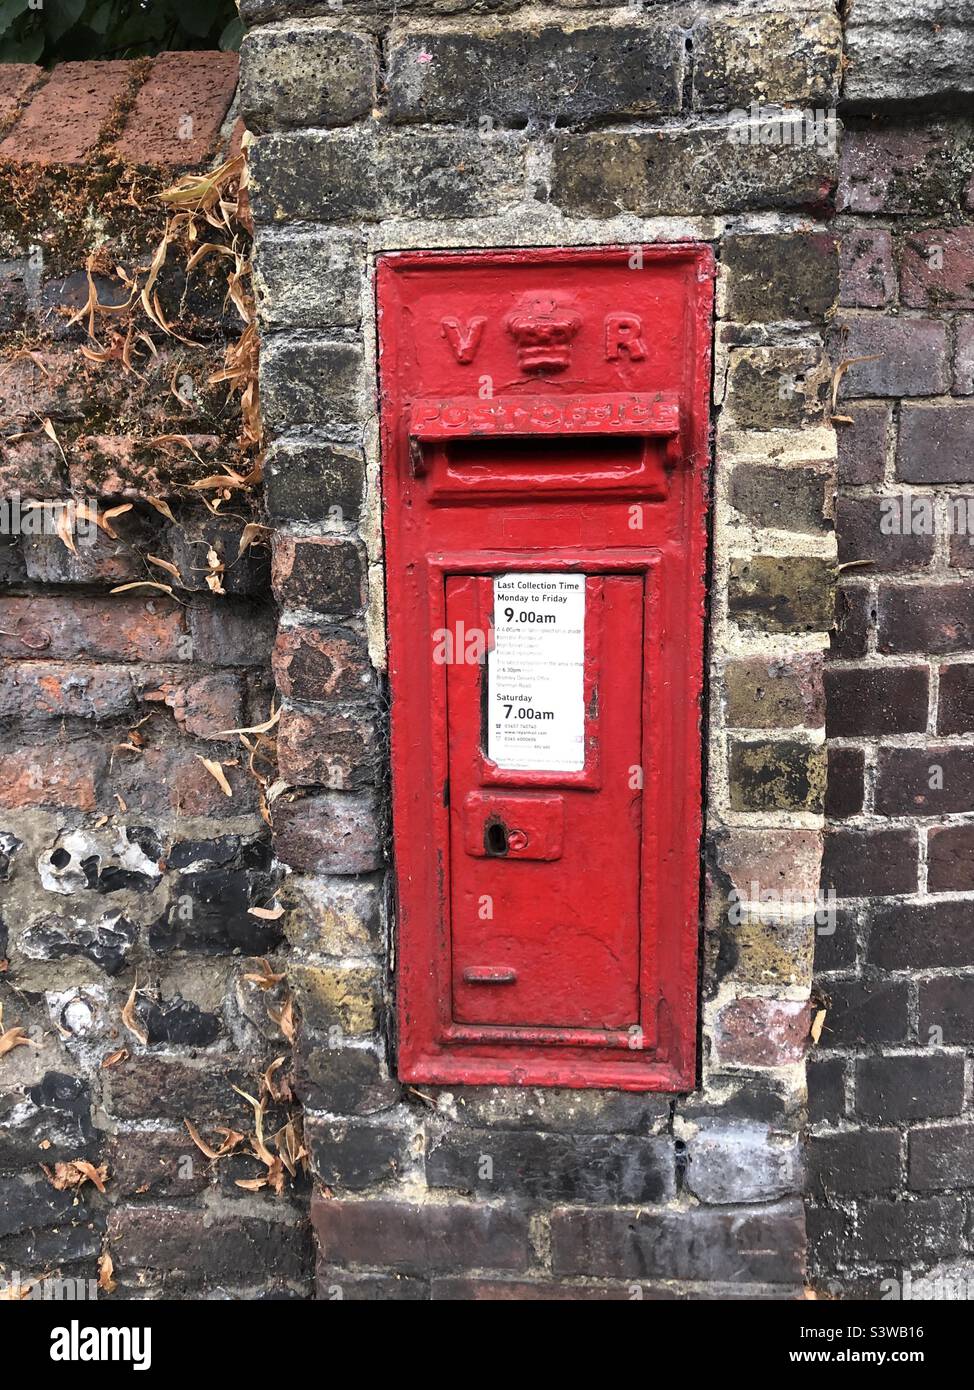 The Royal Mail post box  inserted in a wall Stock Photo